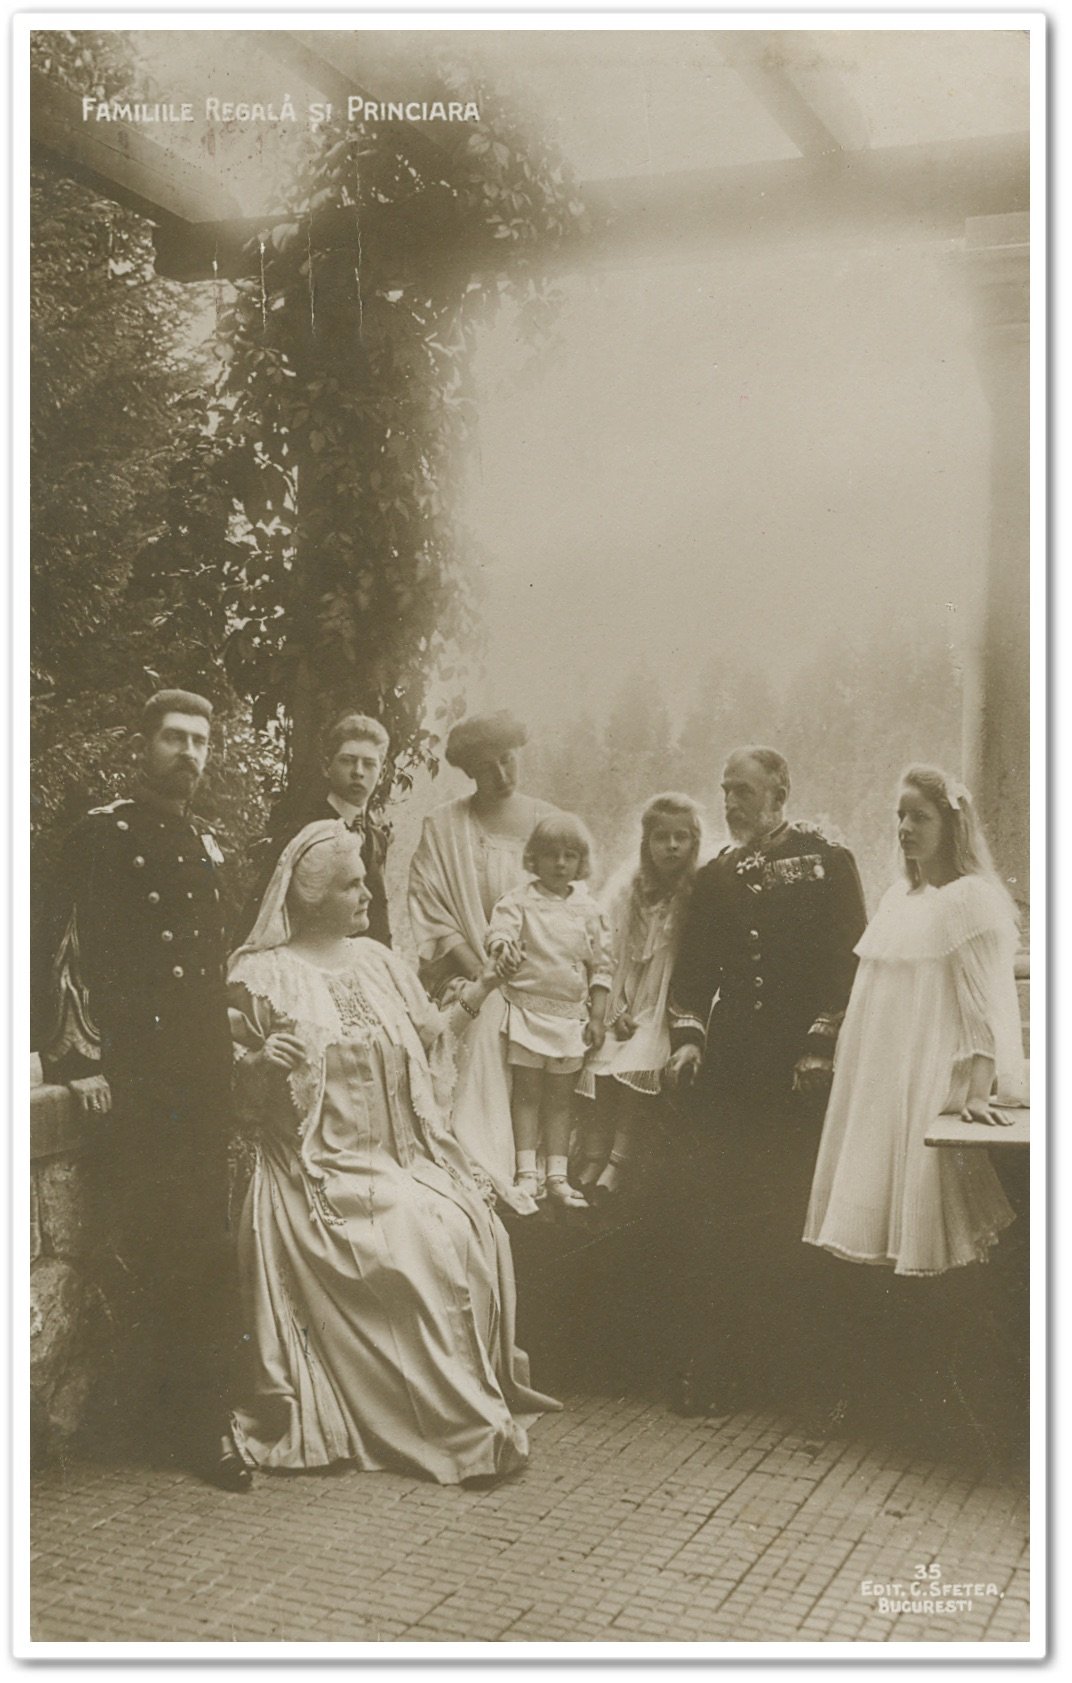 Royal Family of Romania (left to right): Prince Ferdinand, Queen Elisabeth, prince Carol, Princess Maria, Prince Nicolae, Princess Marioara, King Carol Ist, Princess Elisabeta (National Archives of Romania, Bucharest, collection Photographical Documents of the National Archives _A40_F82).